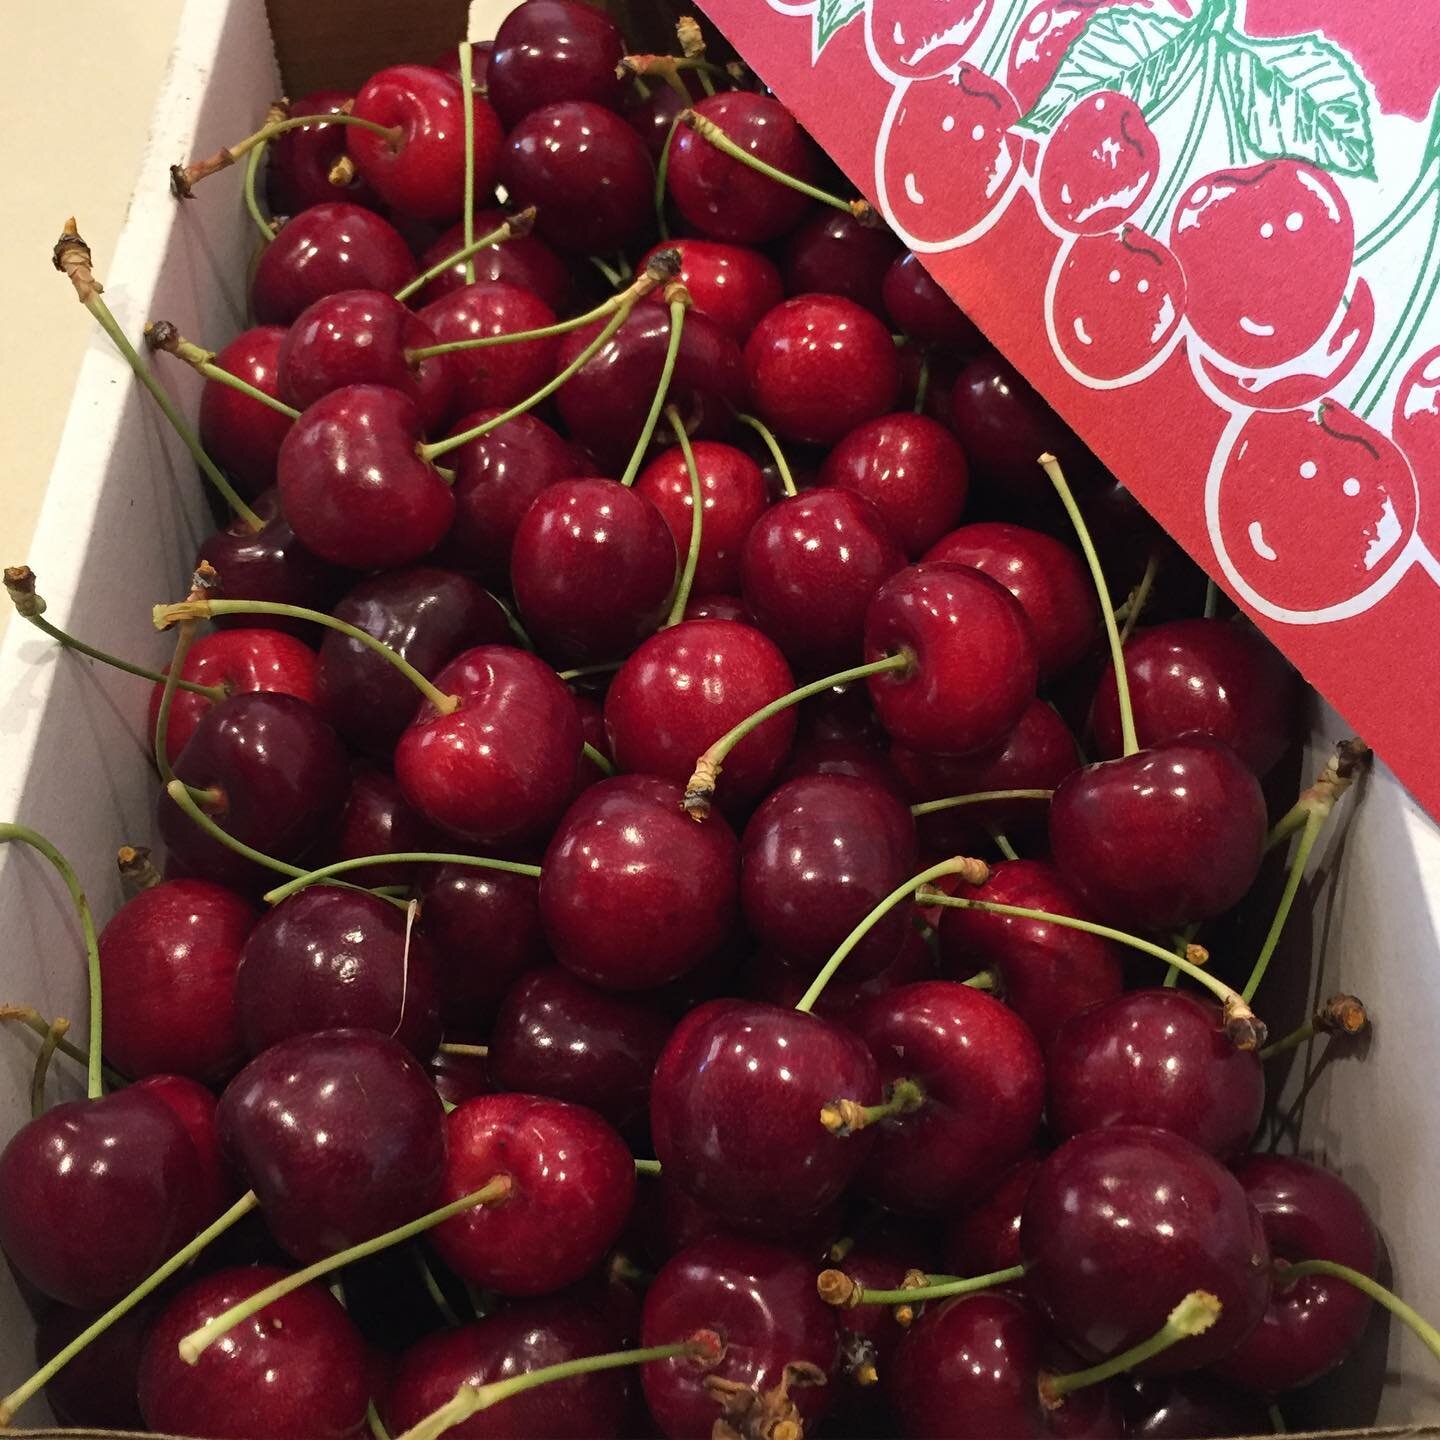 🍒🎄🍒🤩
Christmas produce available for the Strathbogie Shire! Very pleased to announce our fresh produce this week: boxed cherries and garlic scape bunches as well as our  olive oil are available to purchase through Strathbogie Local, a volunteer-r